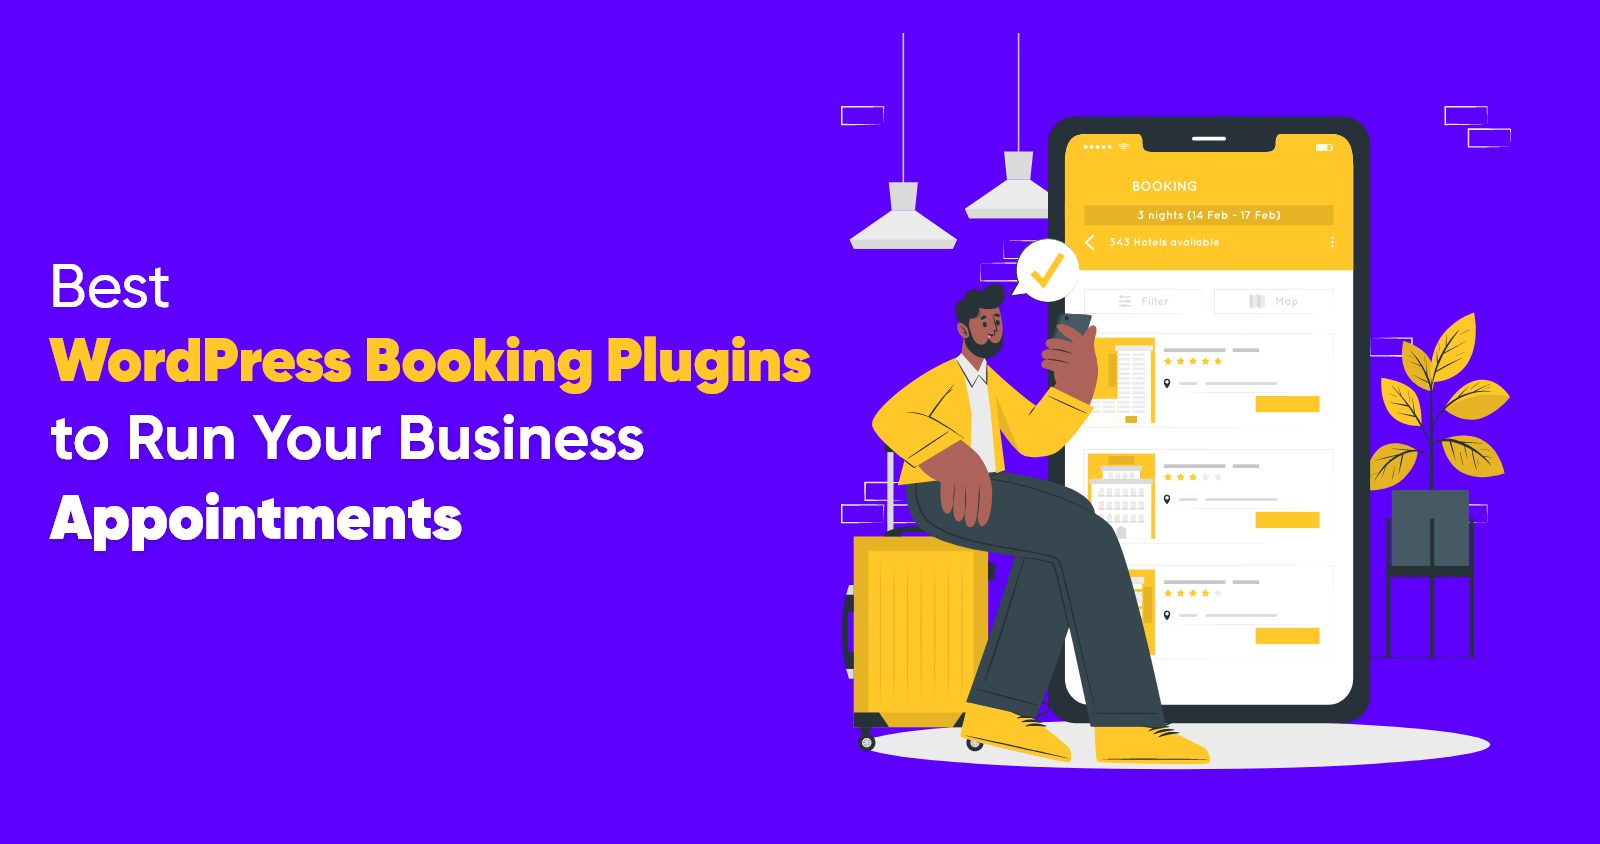 Best WordPress Booking Plugins to Run Your Business Appointments